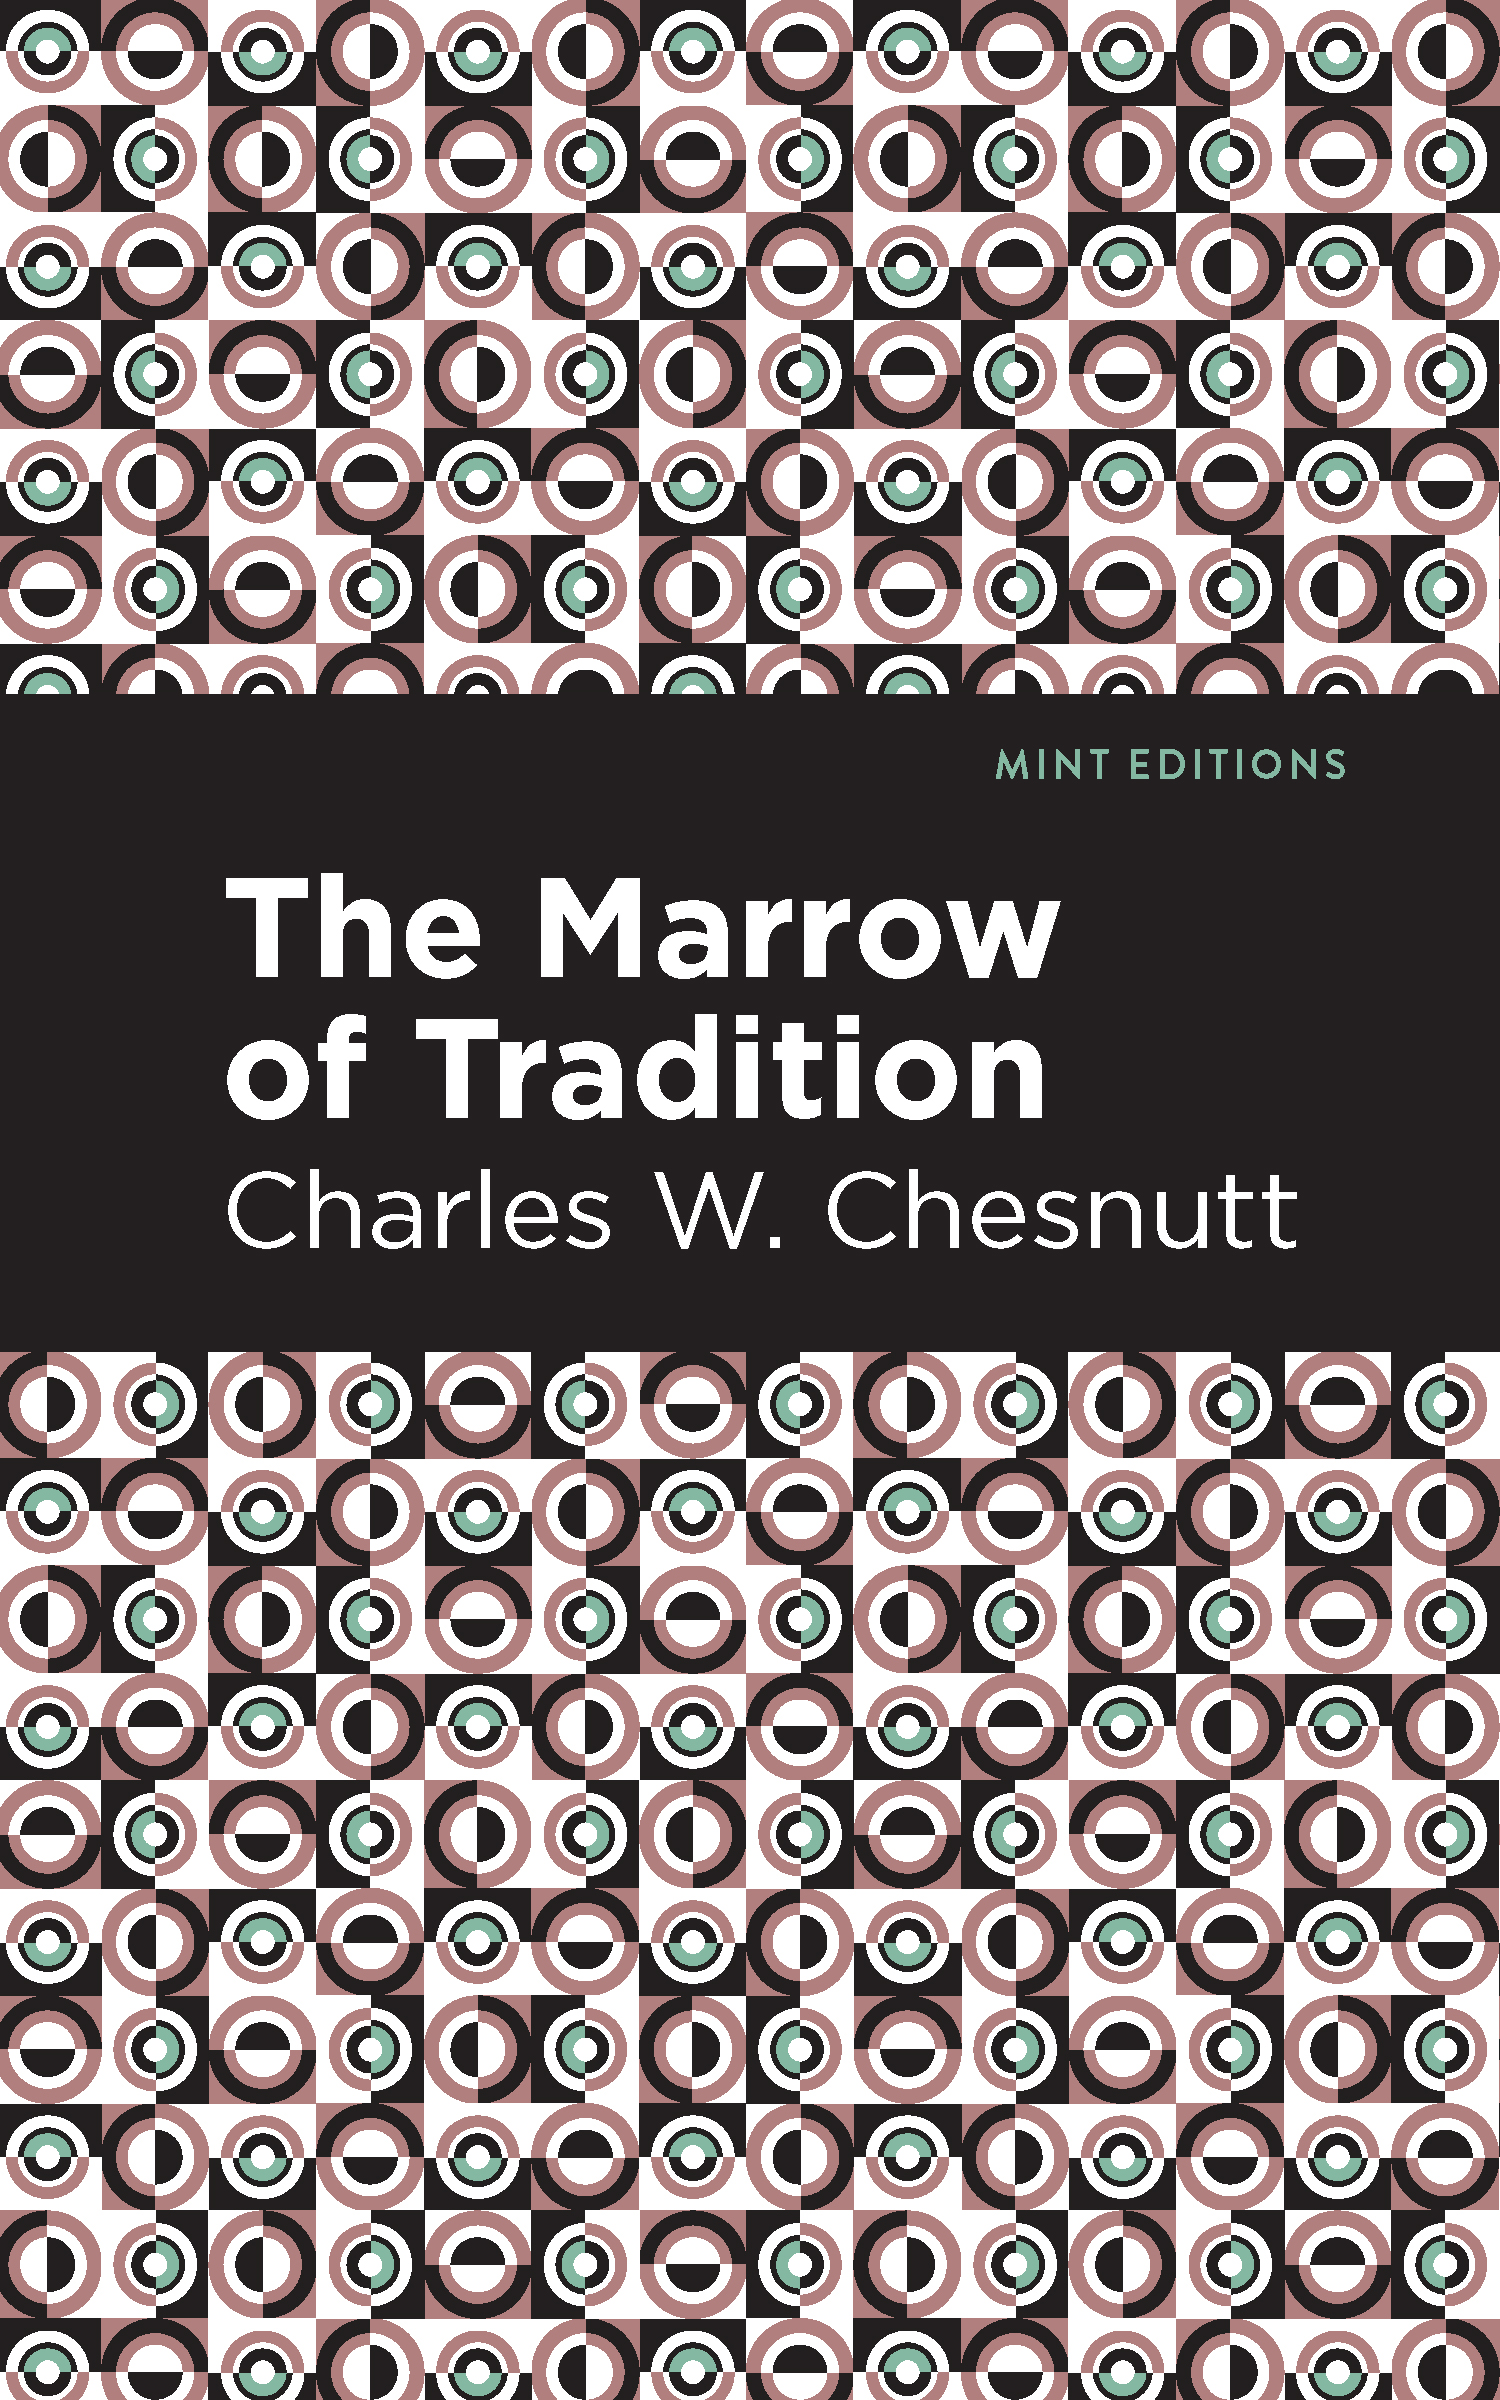 charles chesnutt the marrow of tradition